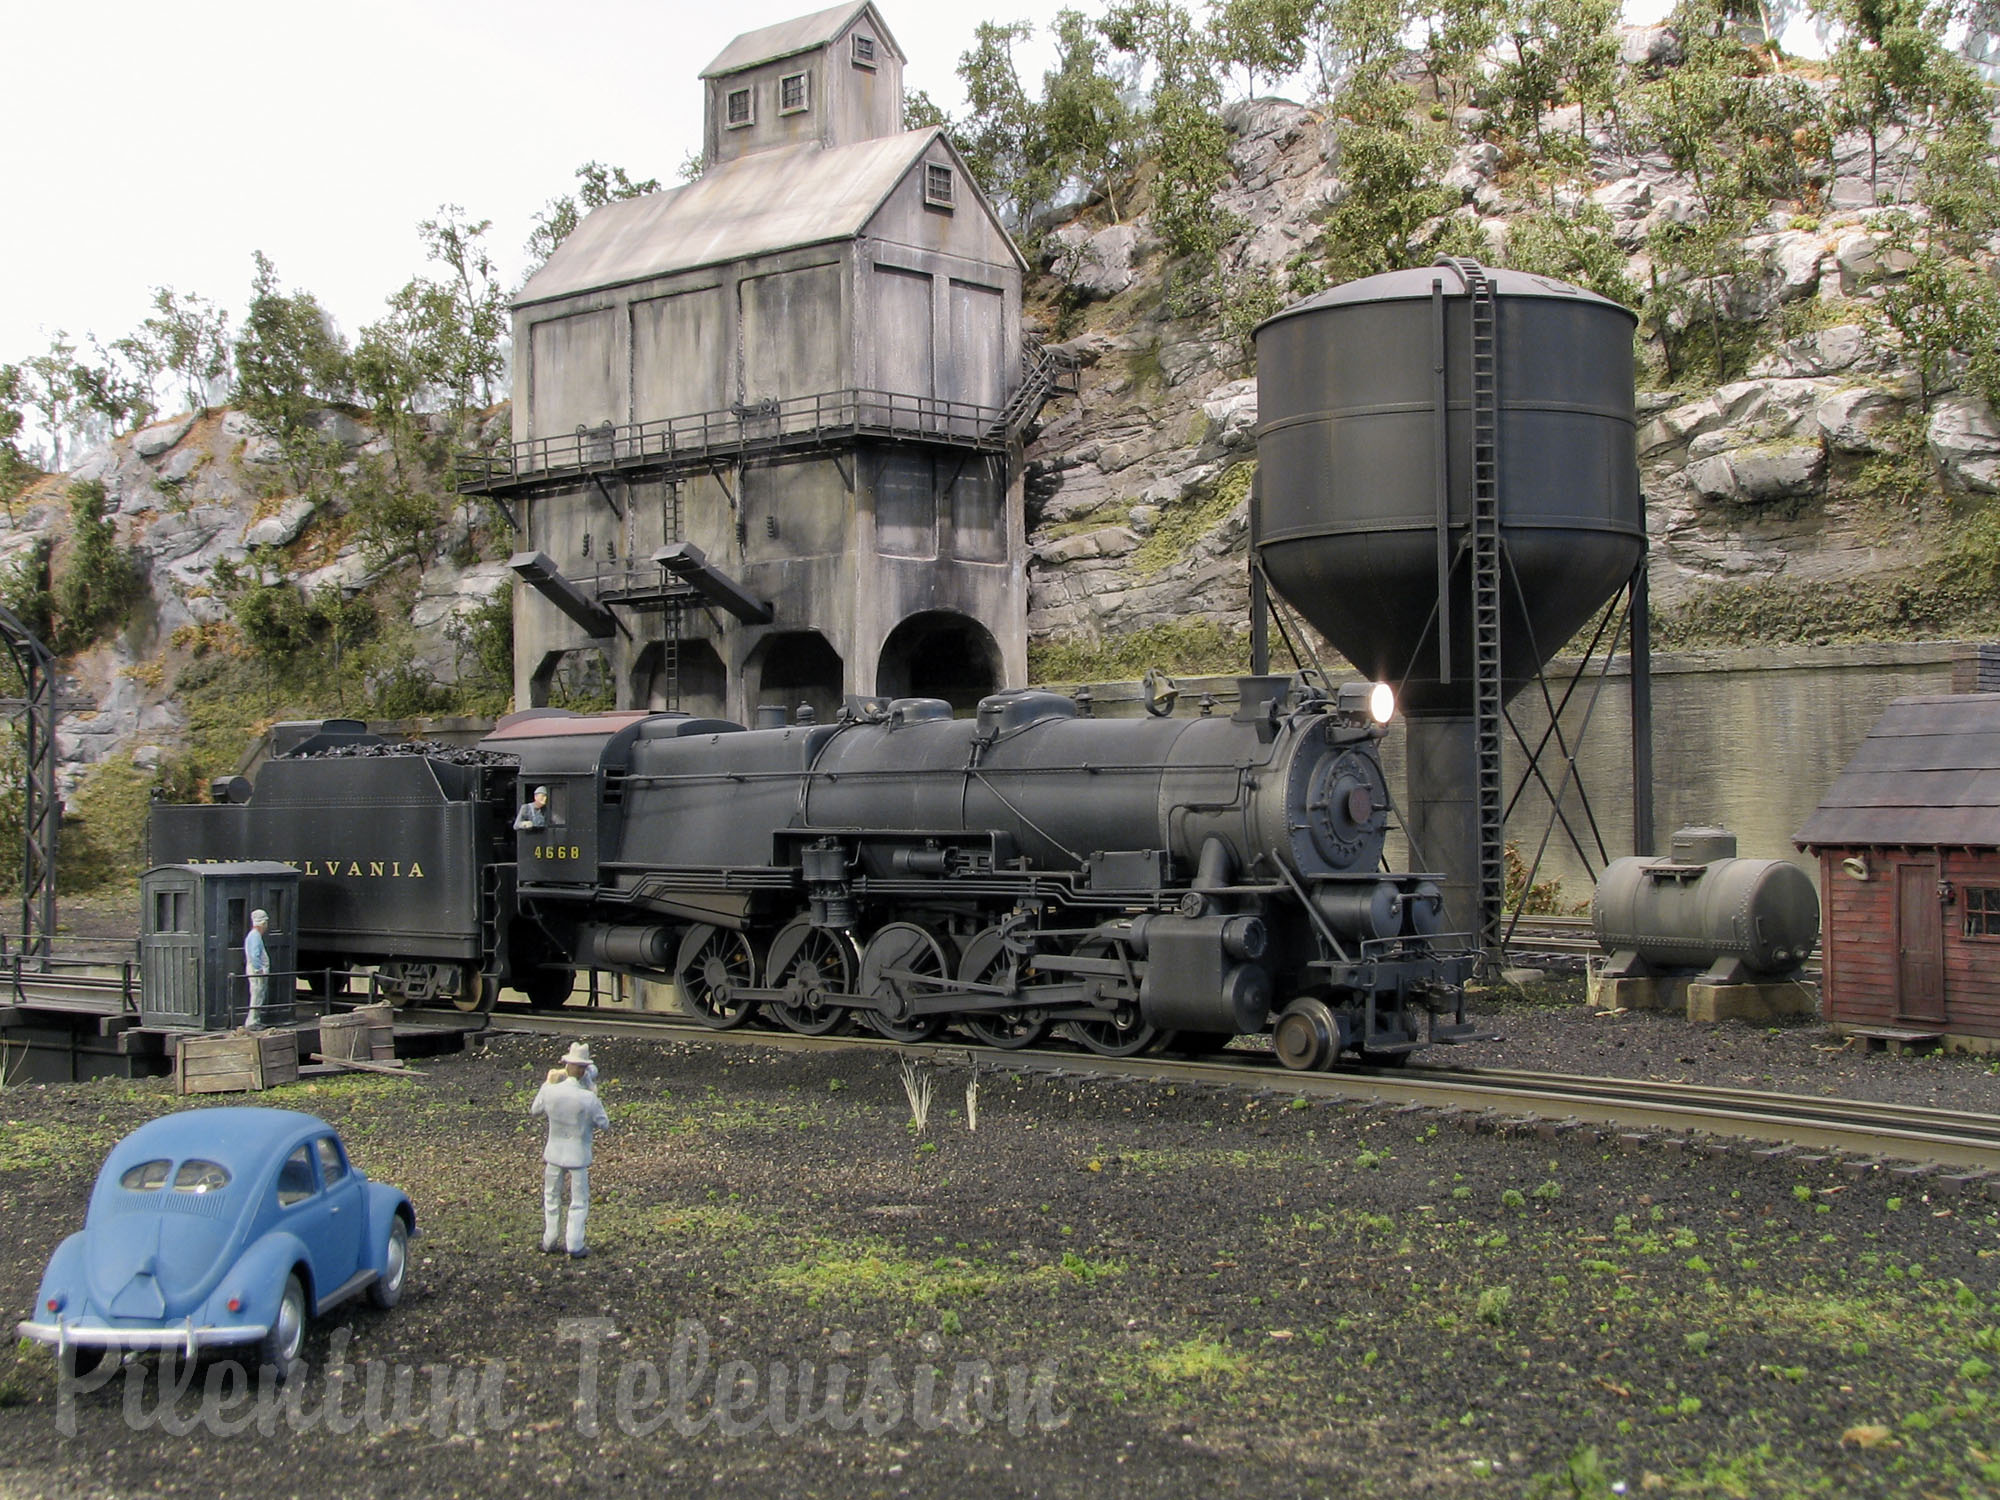 Big Steamers Paradise in O Scale - The Iconic Model Railroad Layout Greenbrook by Norm Charbonneau